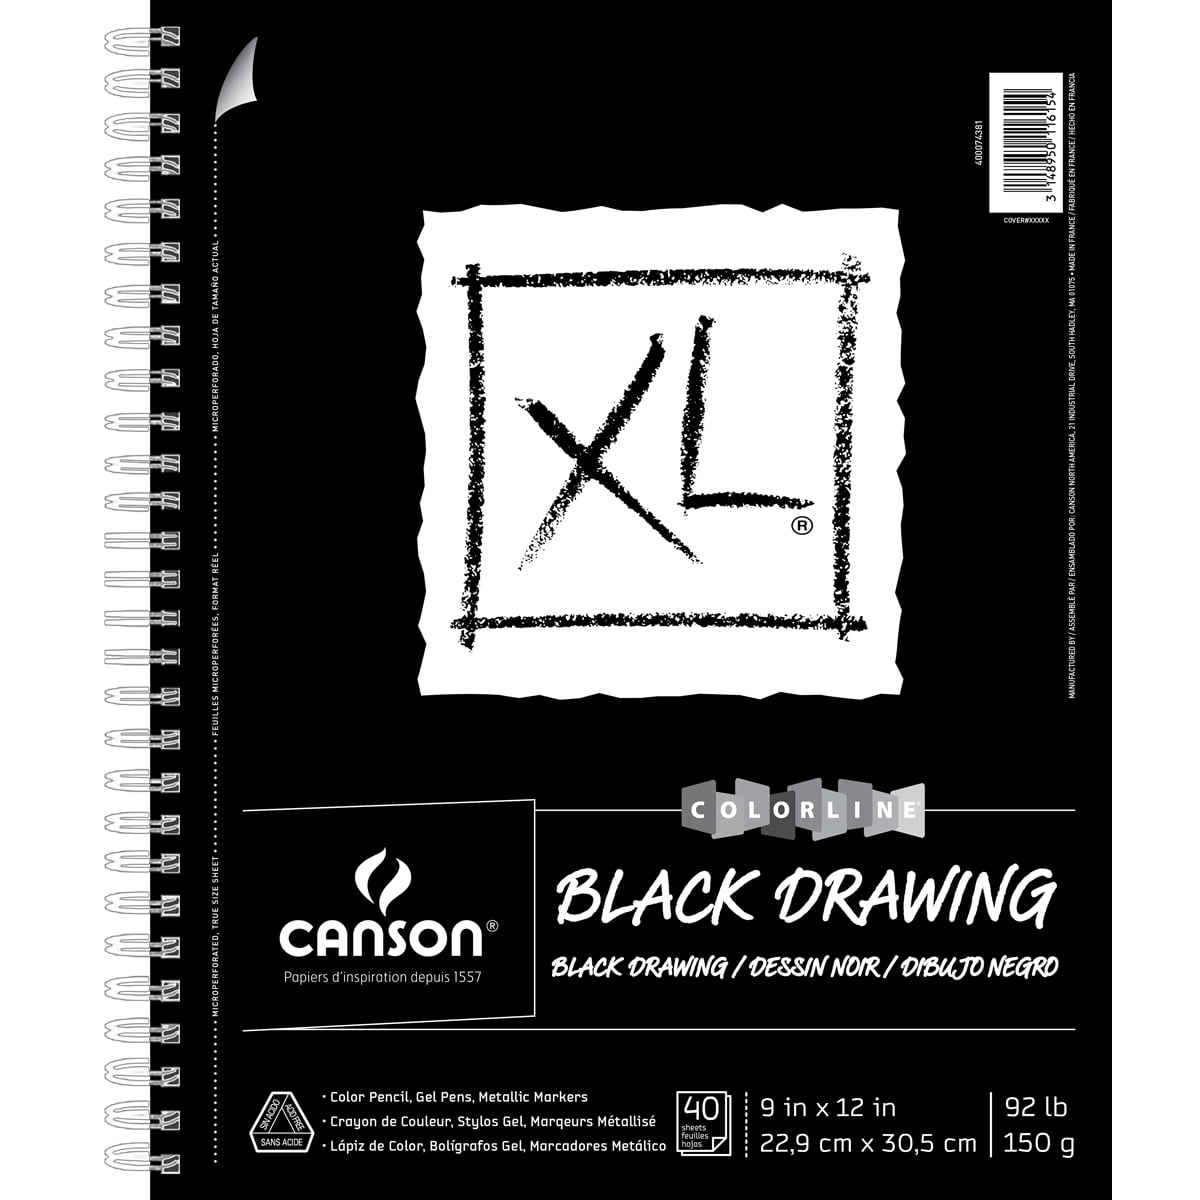 Canson XL Series Drawing Paper, Black, Wirebound Pad, 11x14 inches, 40  Sheets (92lb/150g) - Artist Paper for Adults and Students - Colored Pencil